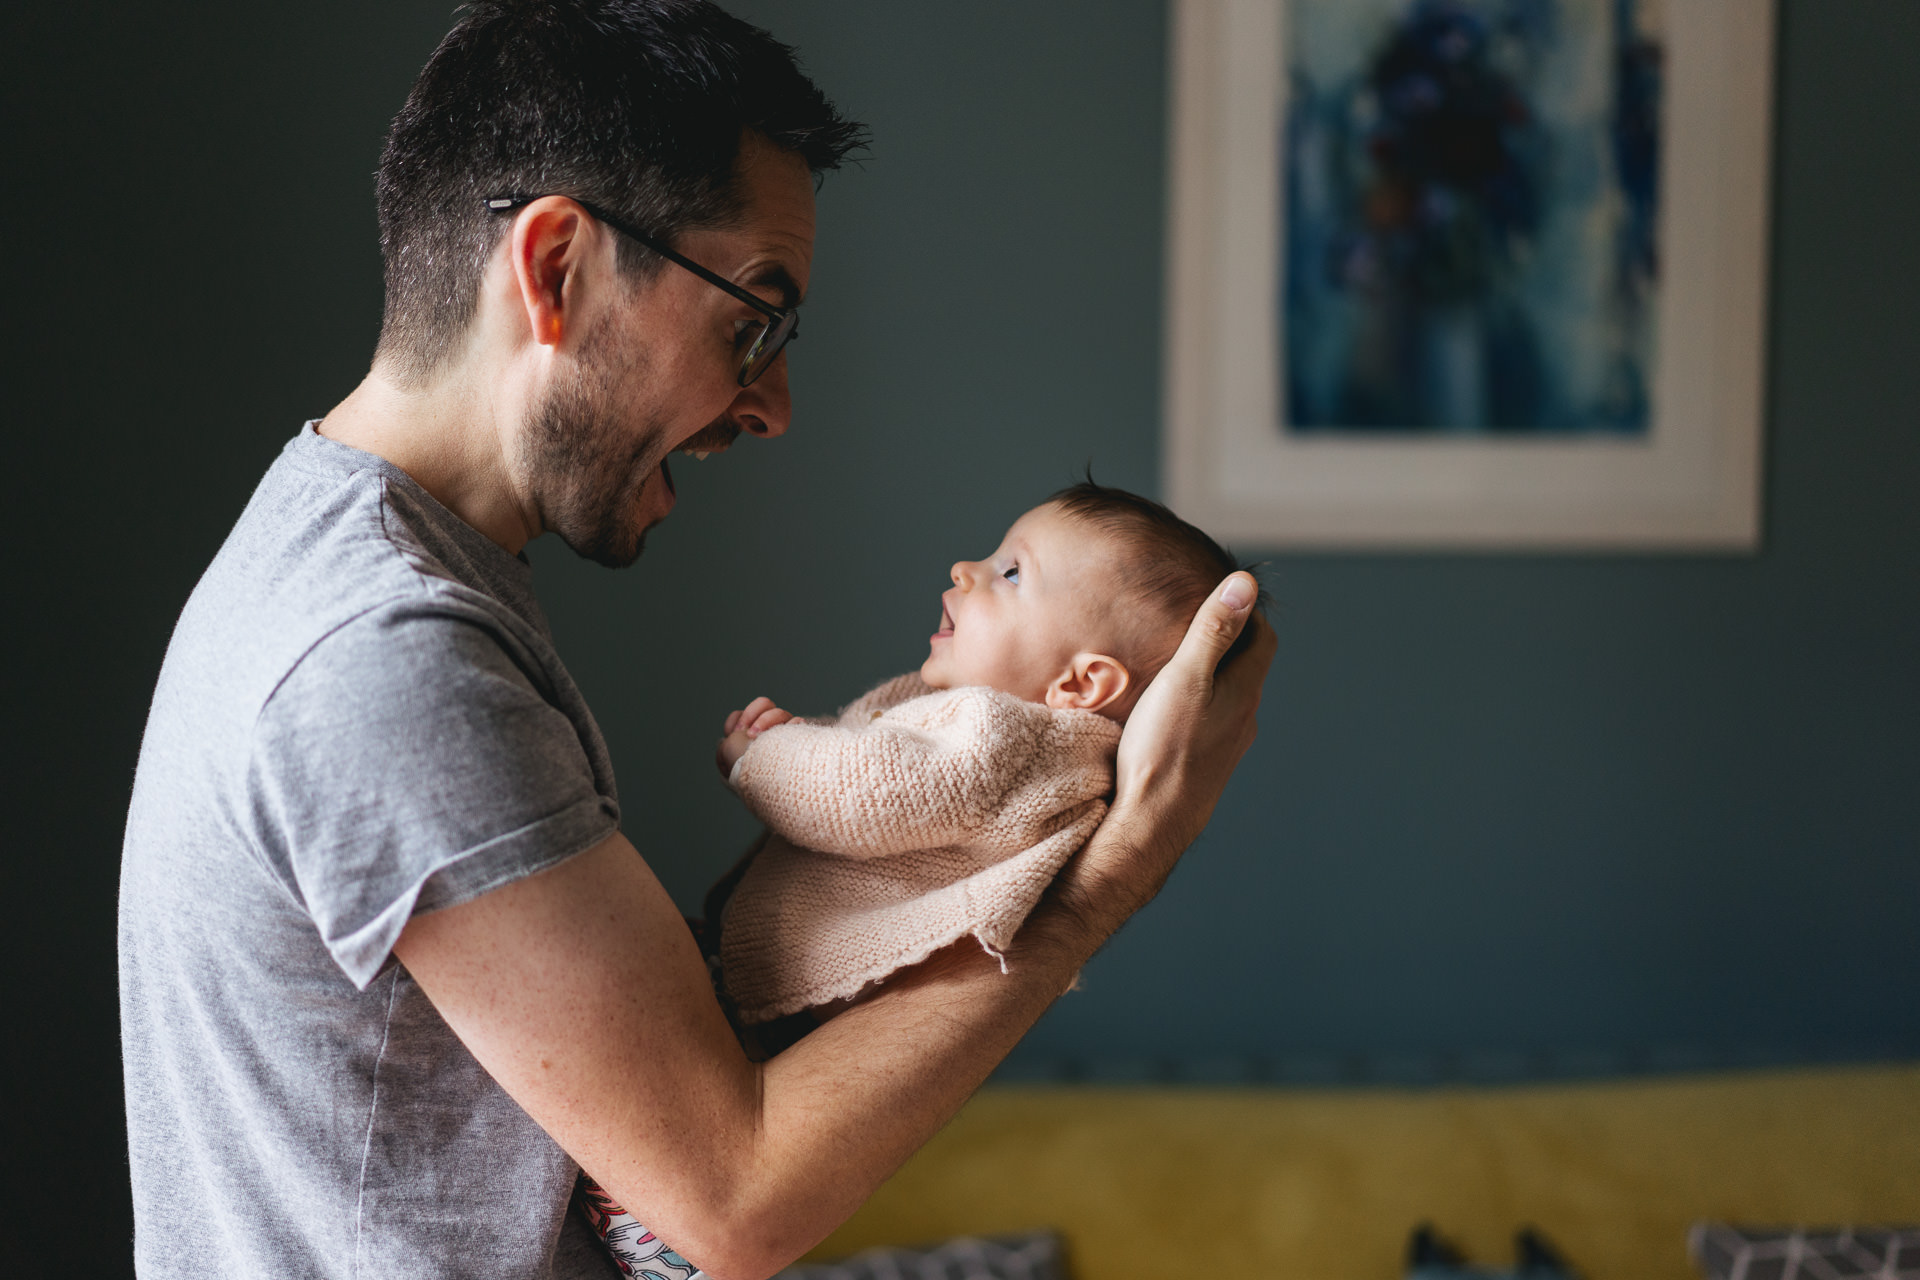 Exeter family photography: a dad holding his baby and smiling at her